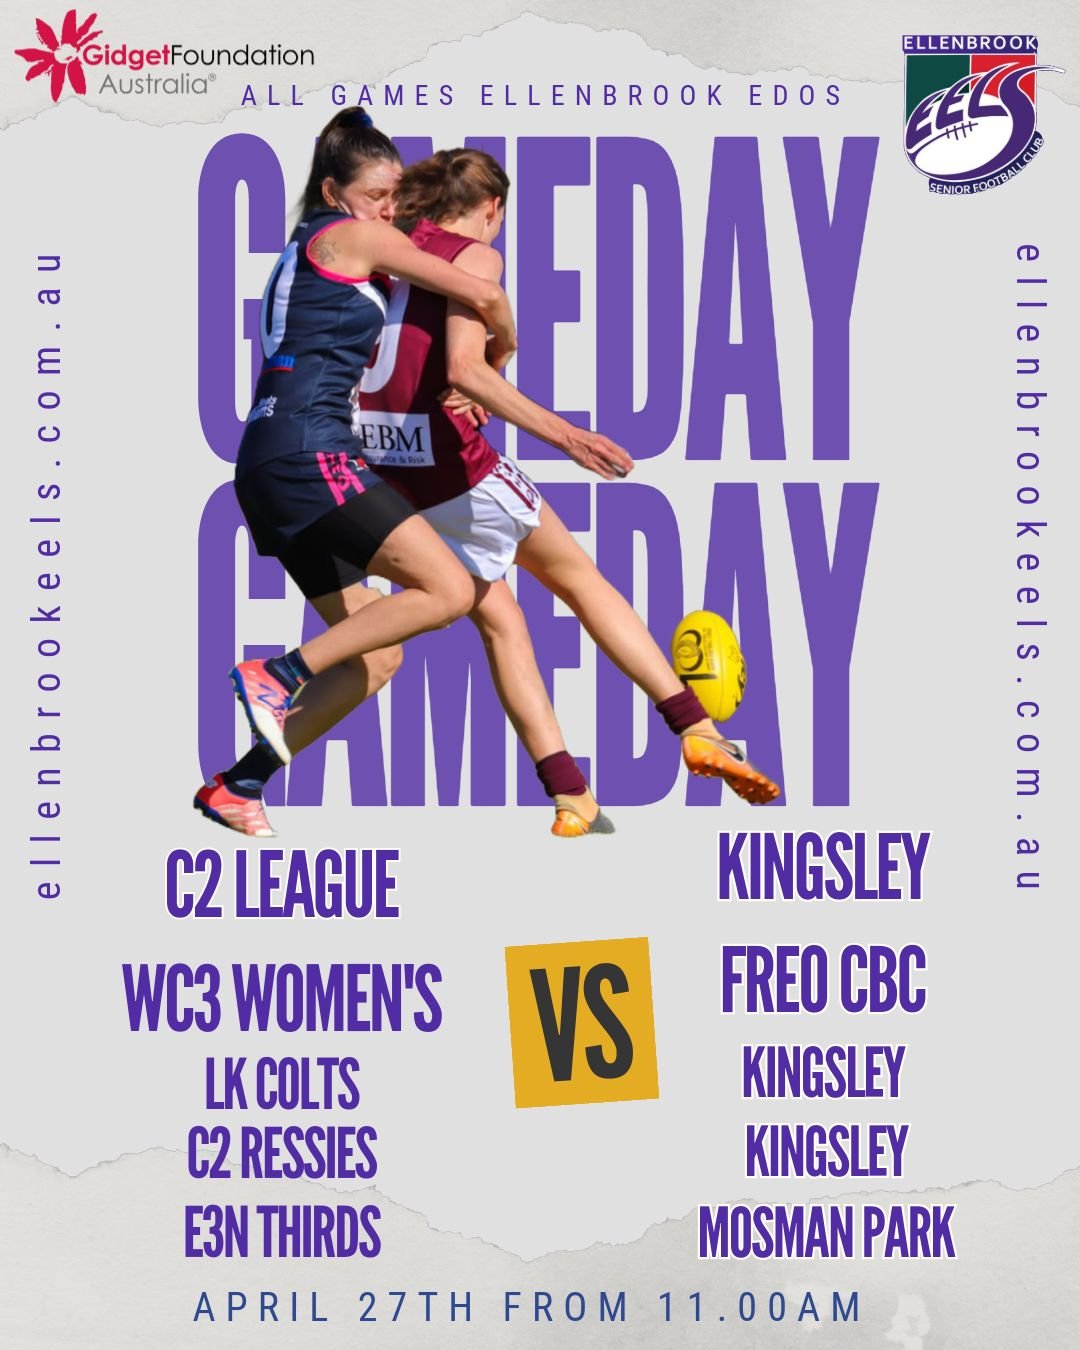 GET UP IT'S GAME DAY

A massive round of home games at the EDOS, as we host our Ladies Day for 2024. The team are raising funds for Gidget Foundation Australia, and any support is greatly appreciated. 

The fixtures for today are:

WC3 Women v Freo C